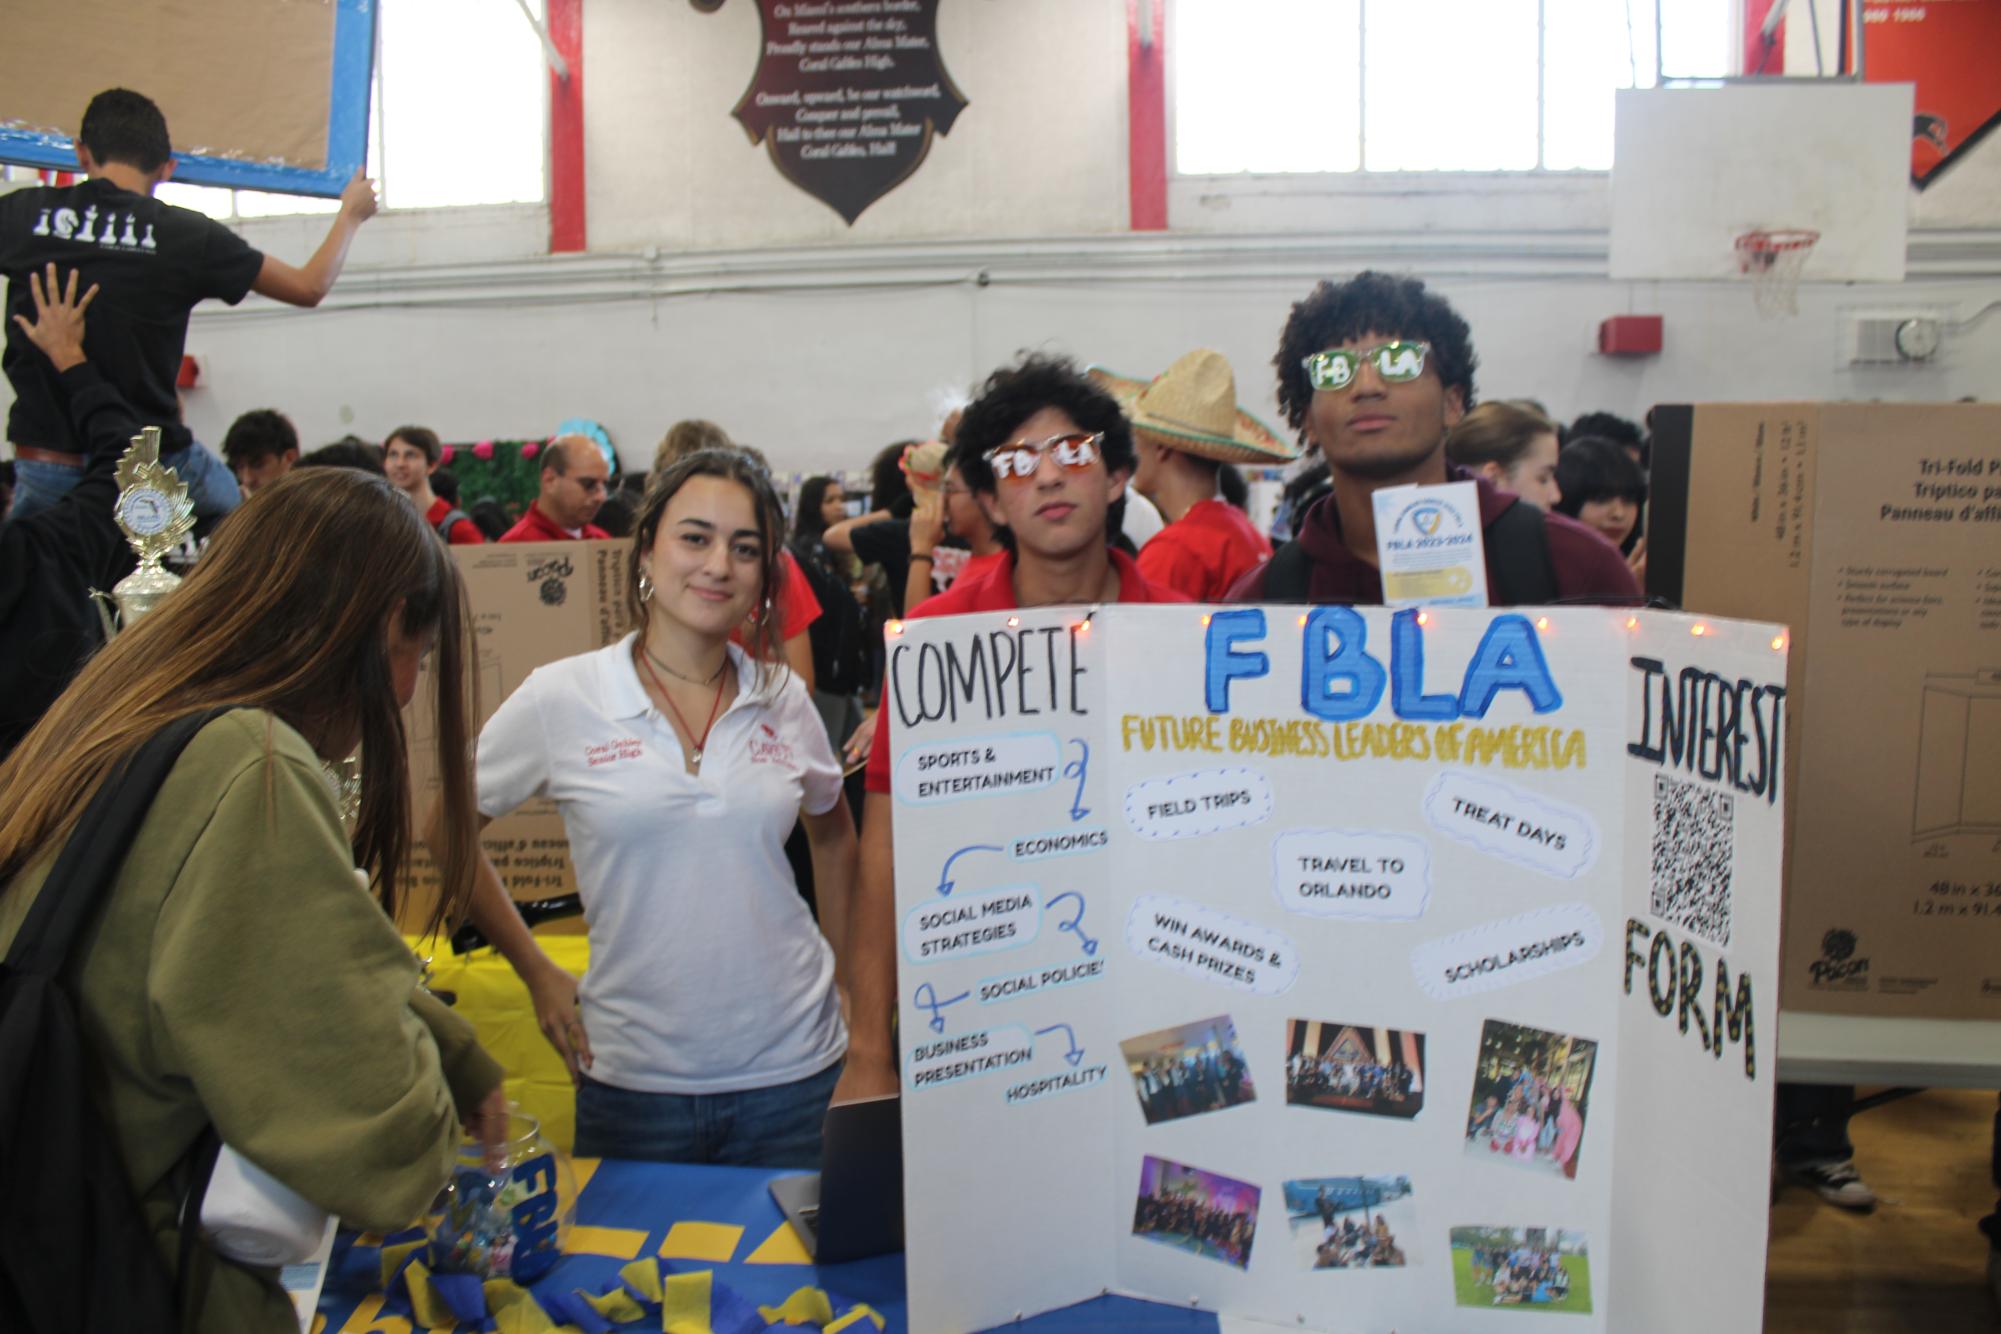 FBLA is the largest business career student organization in the world, helping students prepare for future careers.